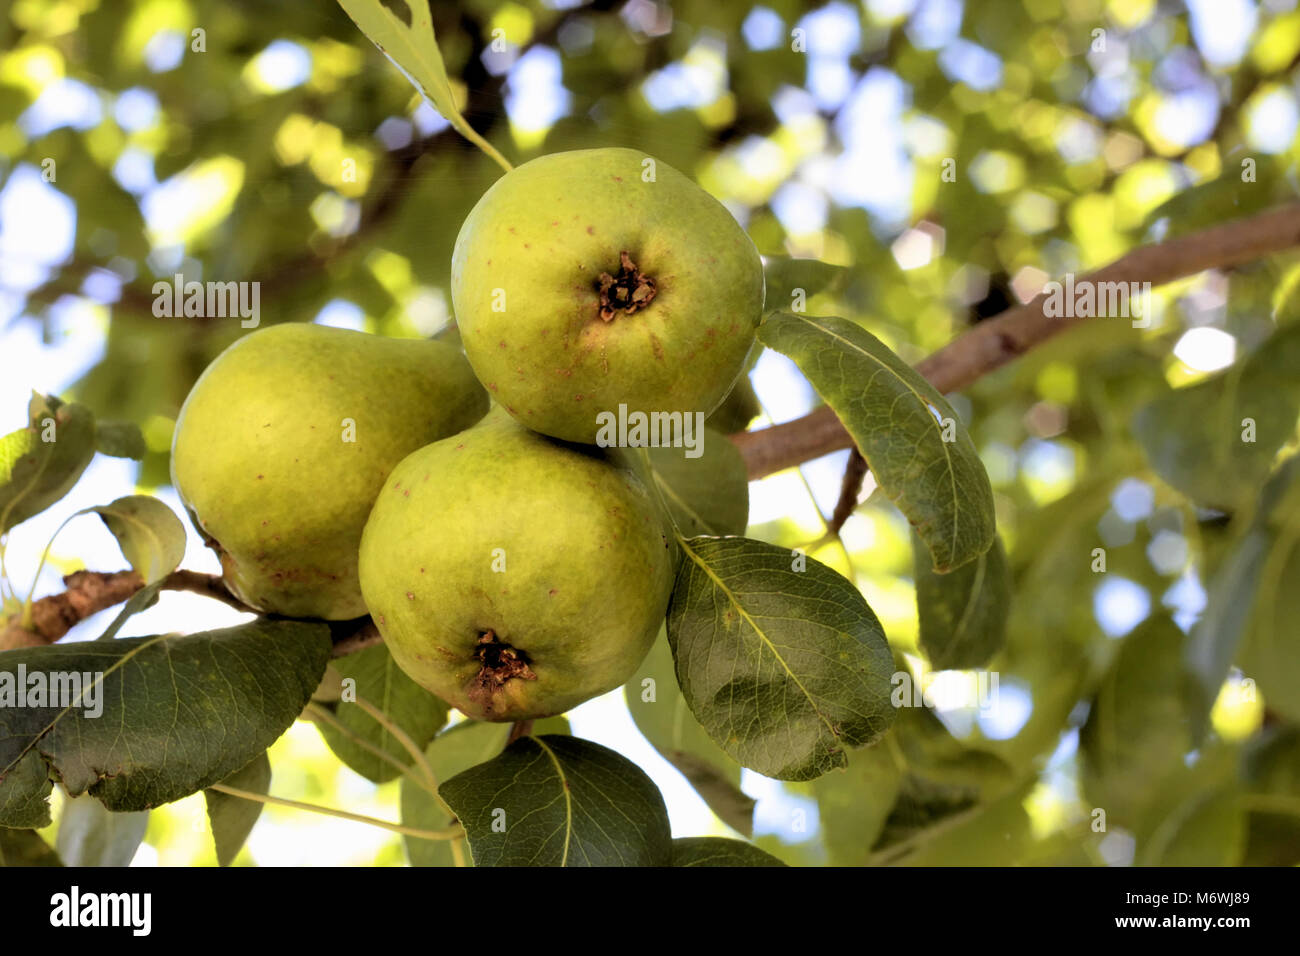 Three pears ripening on a pear tree are shaded from the dappled sunlight. Stock Photo